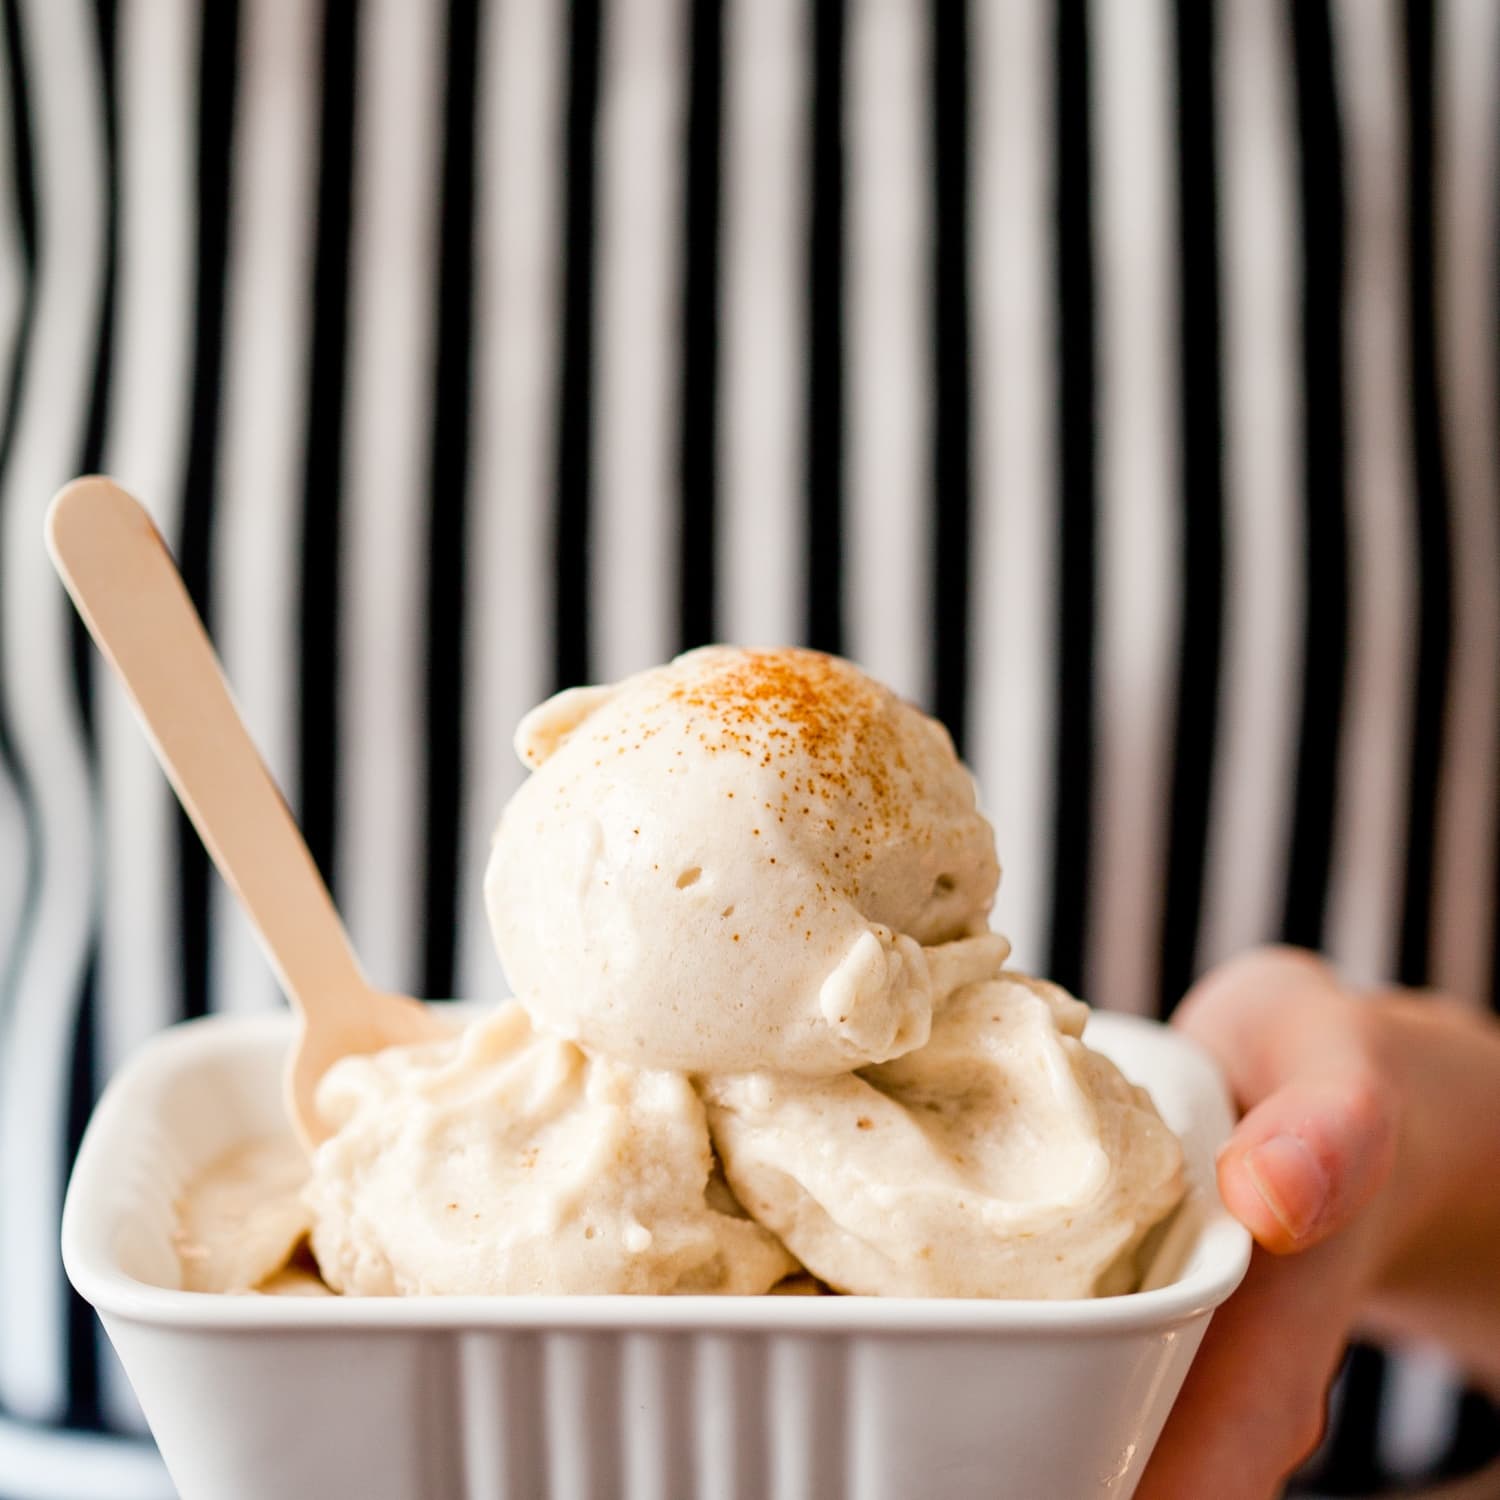 Shop the best ice cream gifts: Ice cream makers, scoops and deliveries